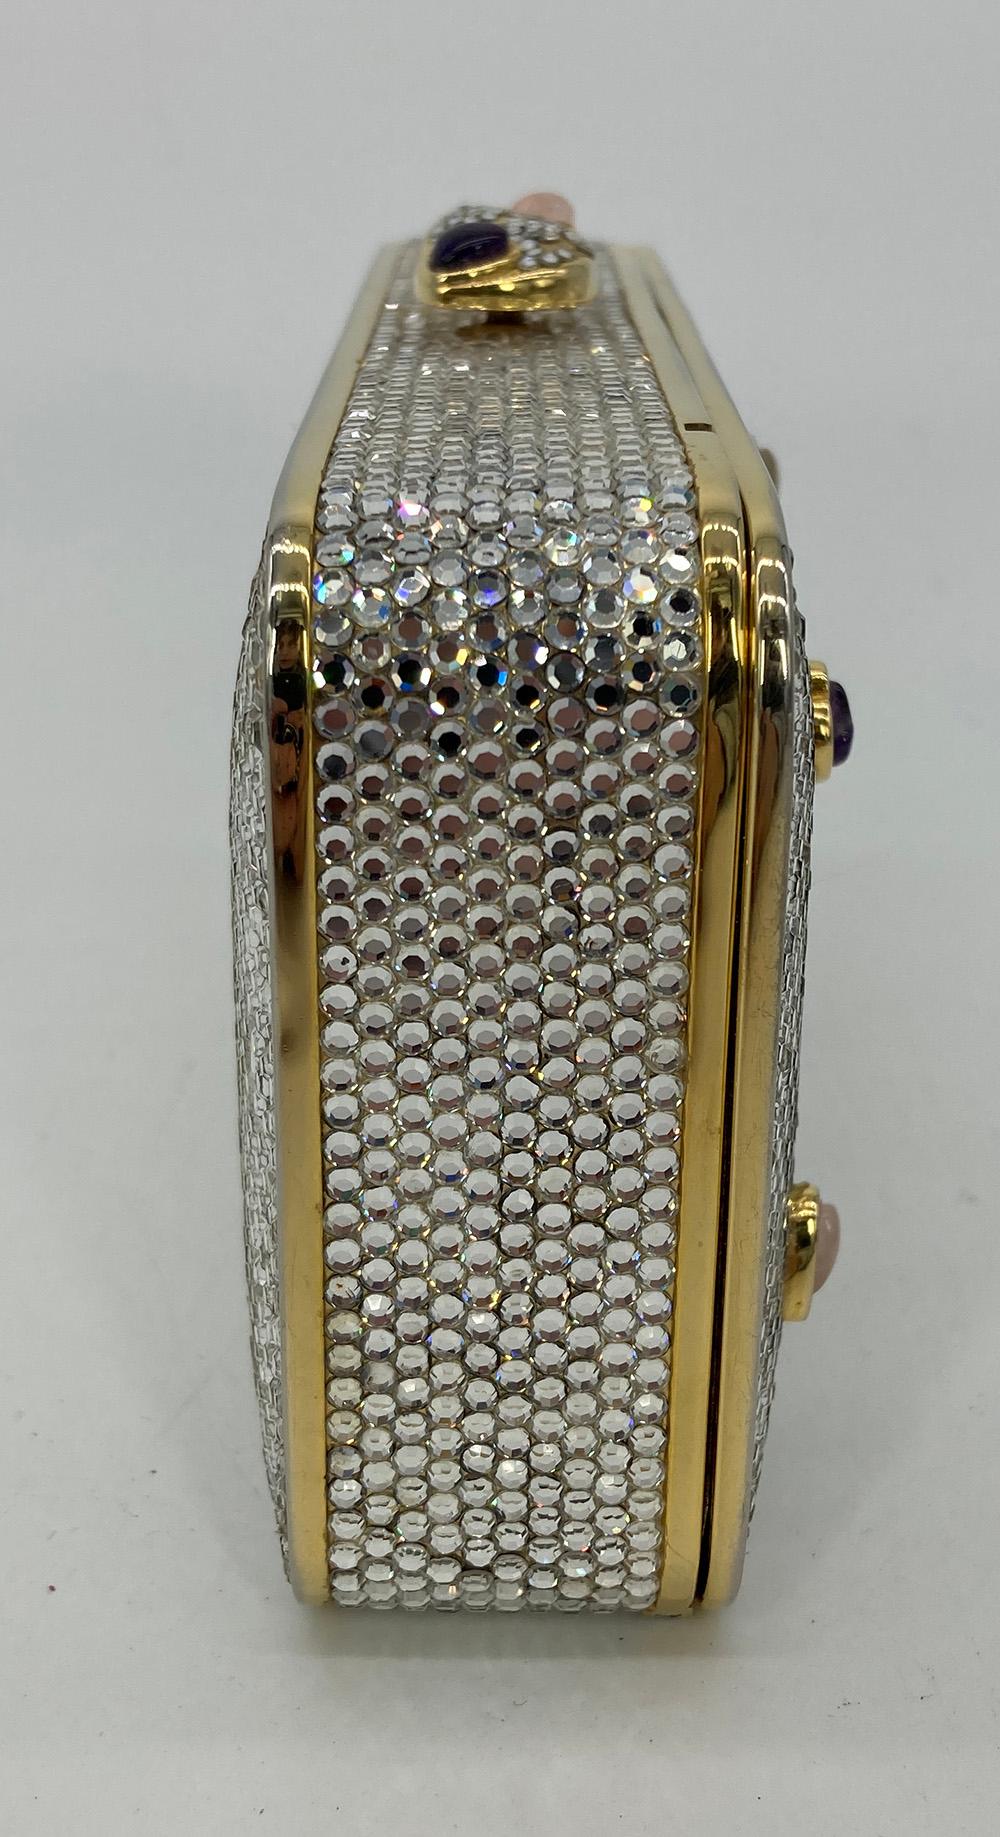 Judith Leiber Crystal Gemstone Hearts Minaudiere in excellent condition. Clear crystal exterior trimmed with gold hardware and multi colored gemstone hearts along front side. Top button closure with pink and purple heart stones. Gold leather